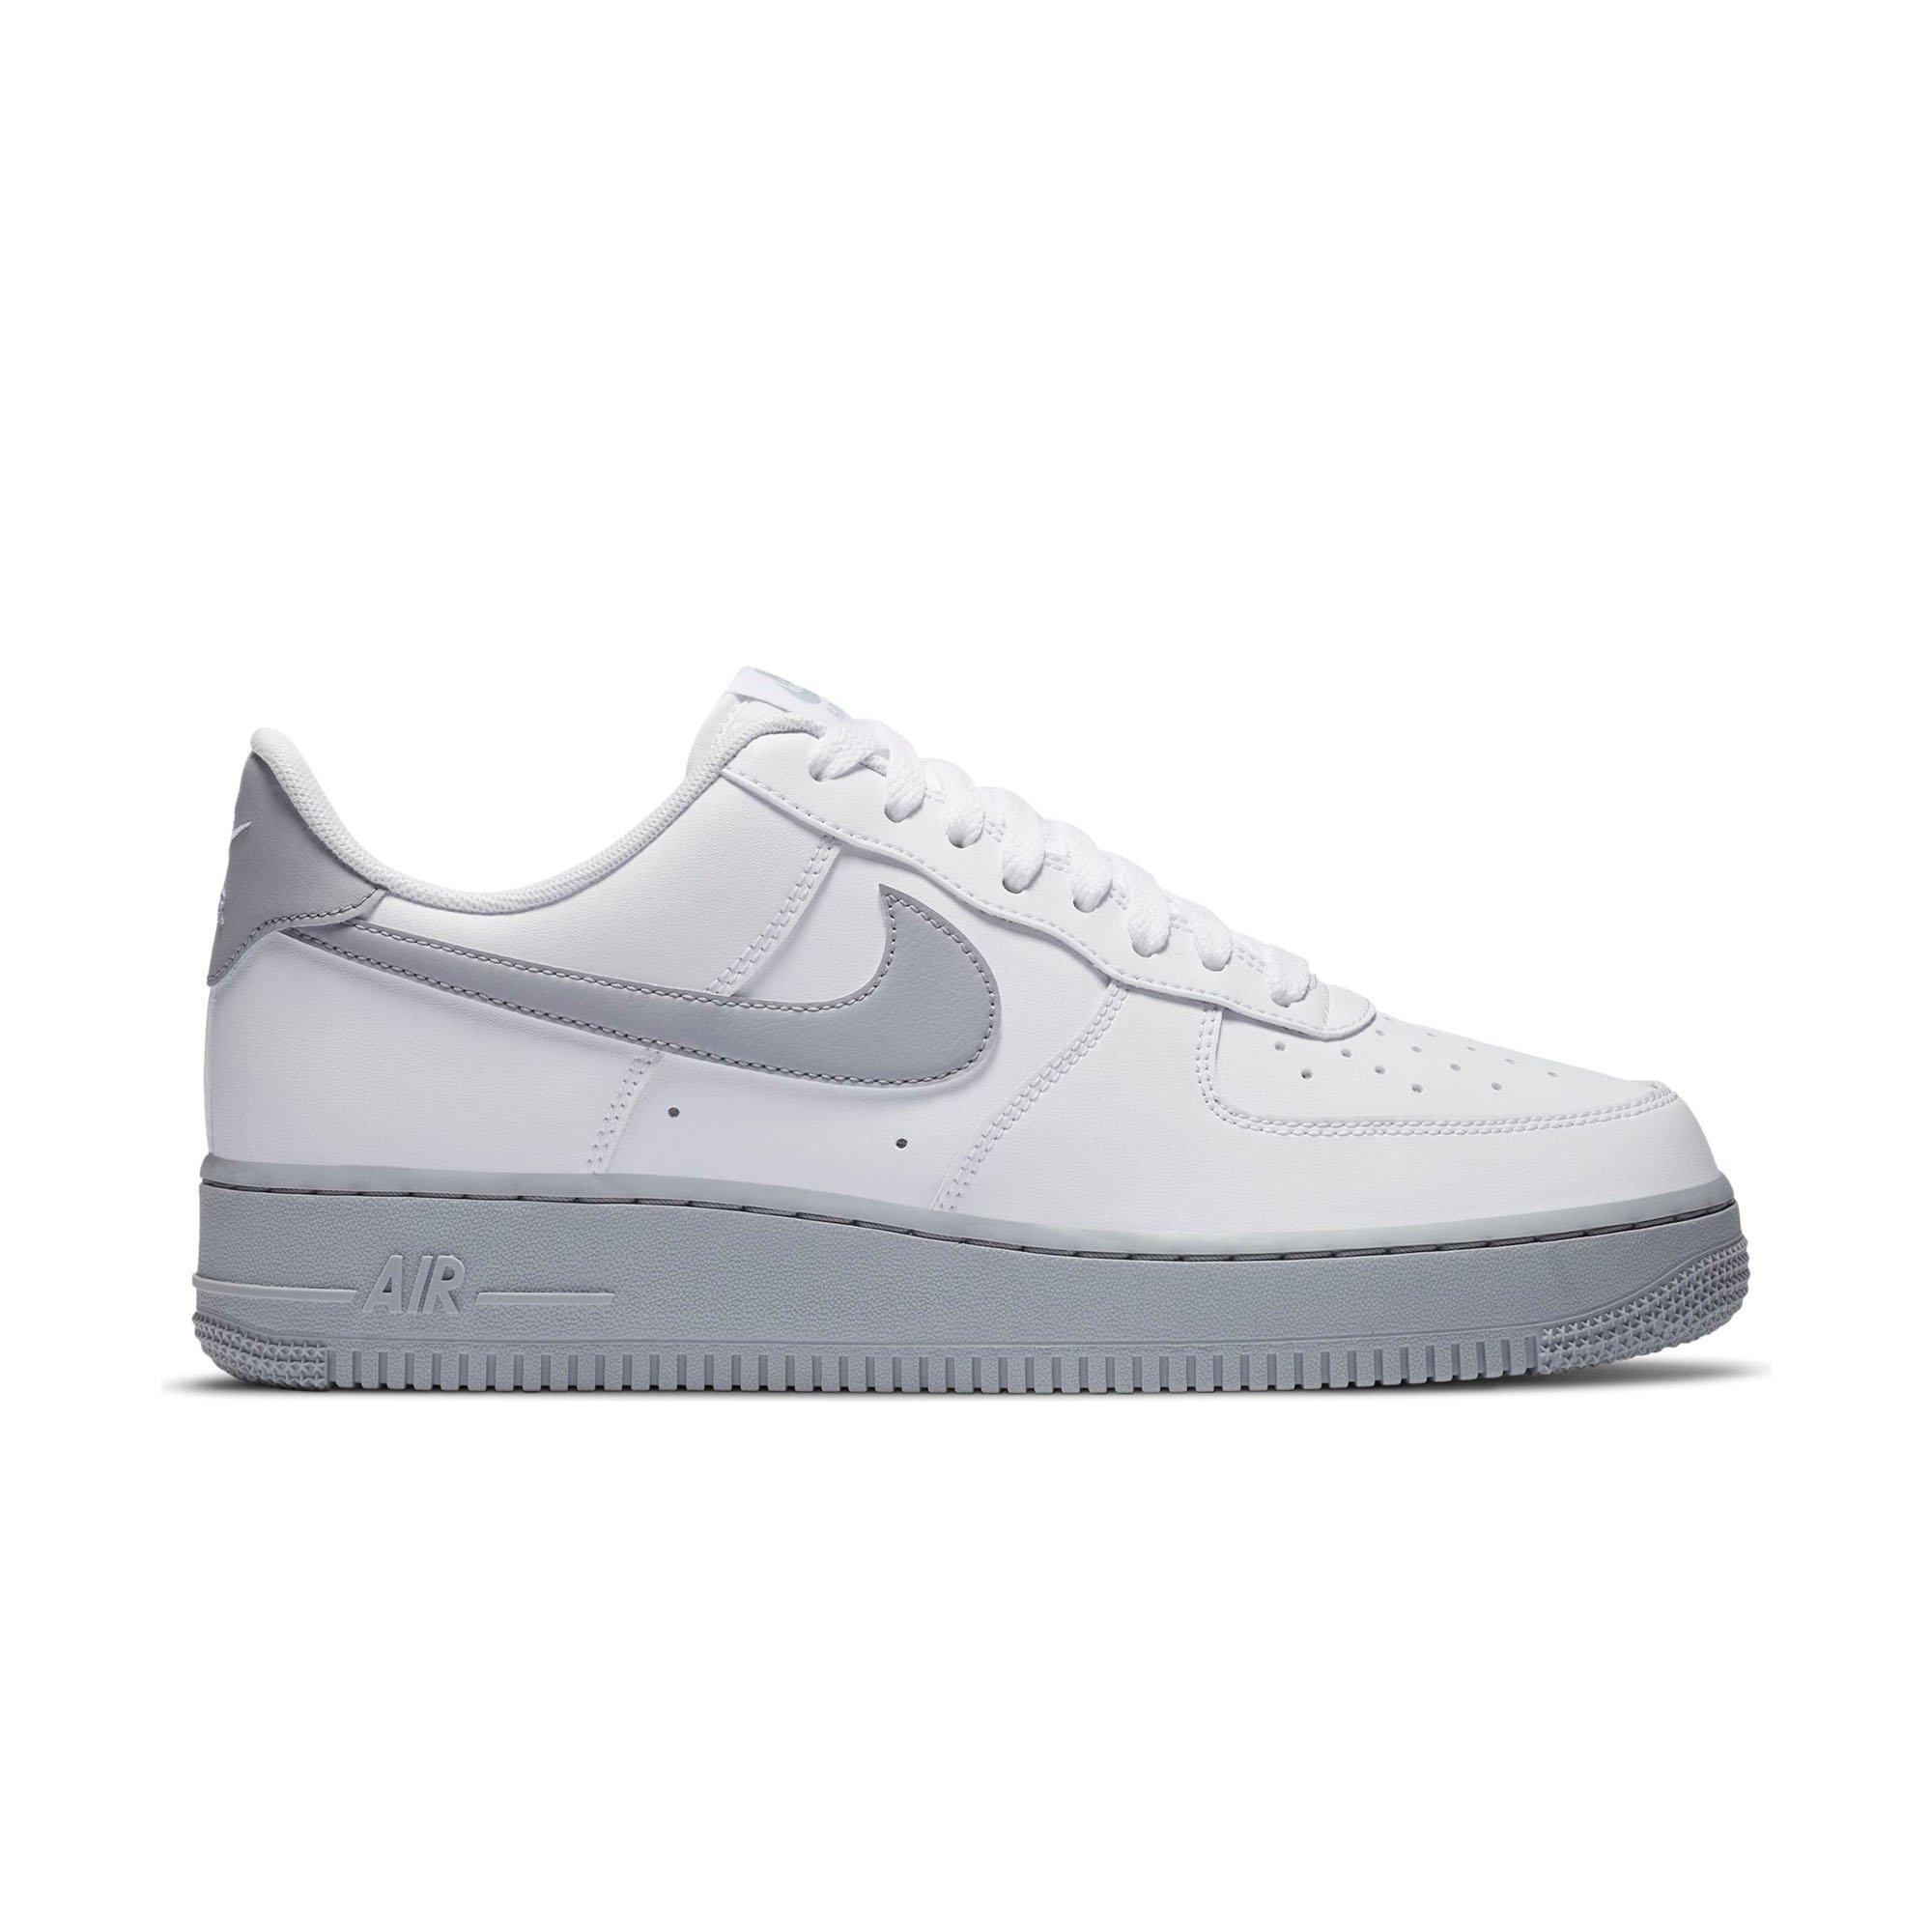 Nike Air Force 1 '07 LV8 'Wolf Grey' | Men's Size 8.5